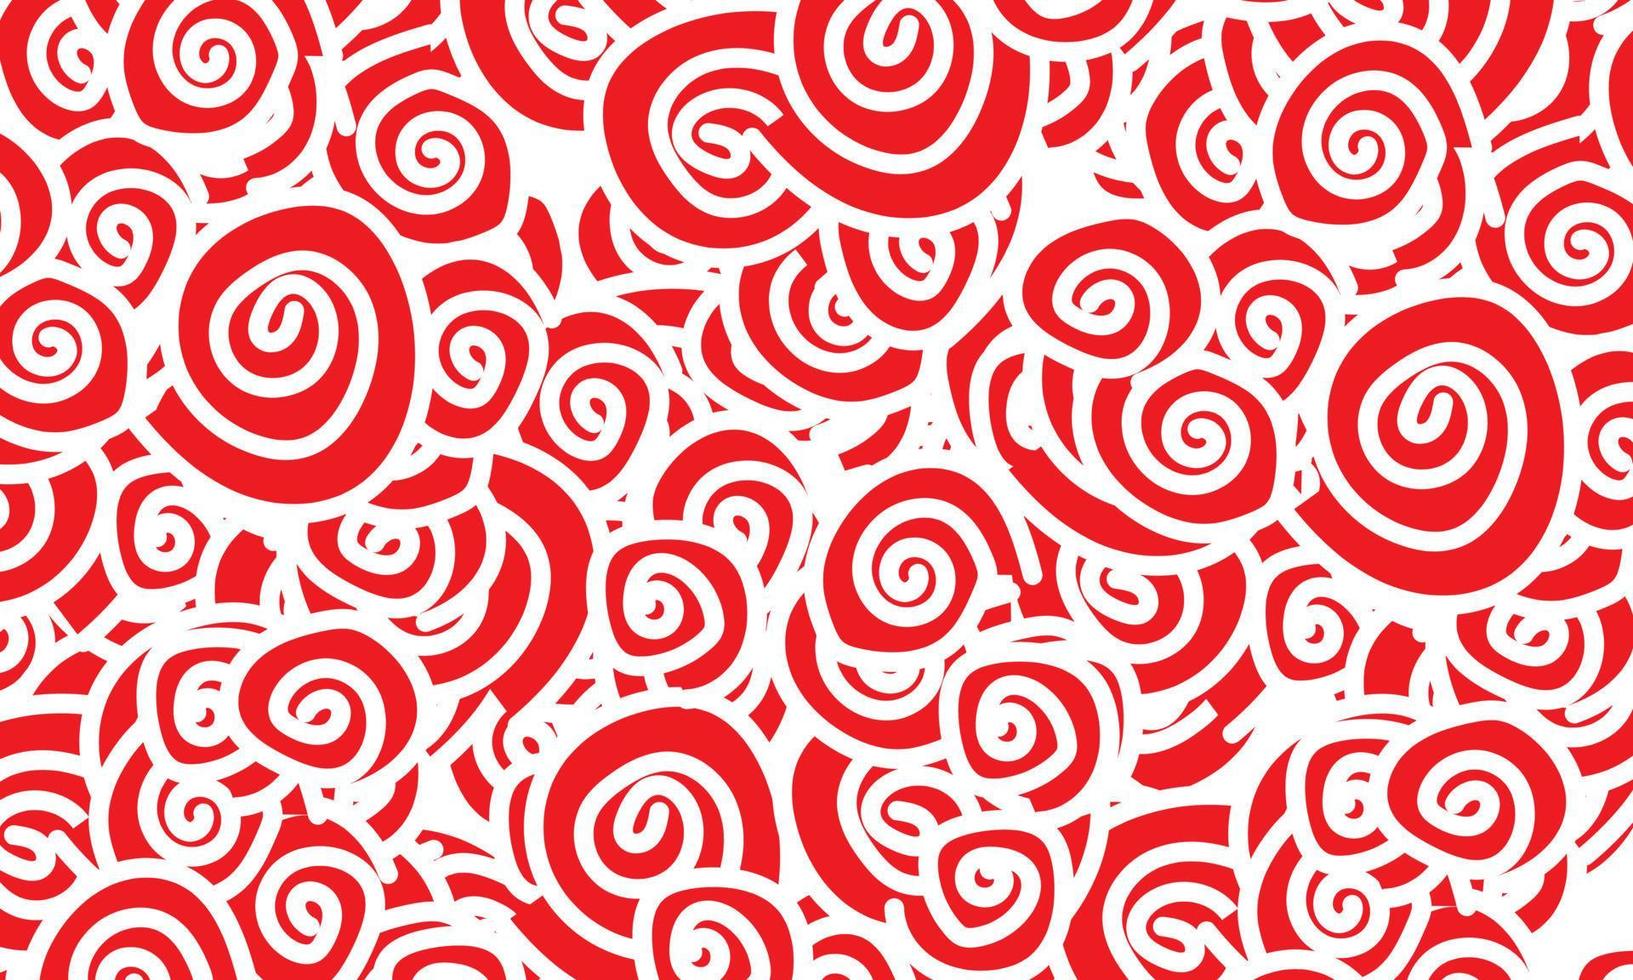 Abstract red and white swirl form. vector